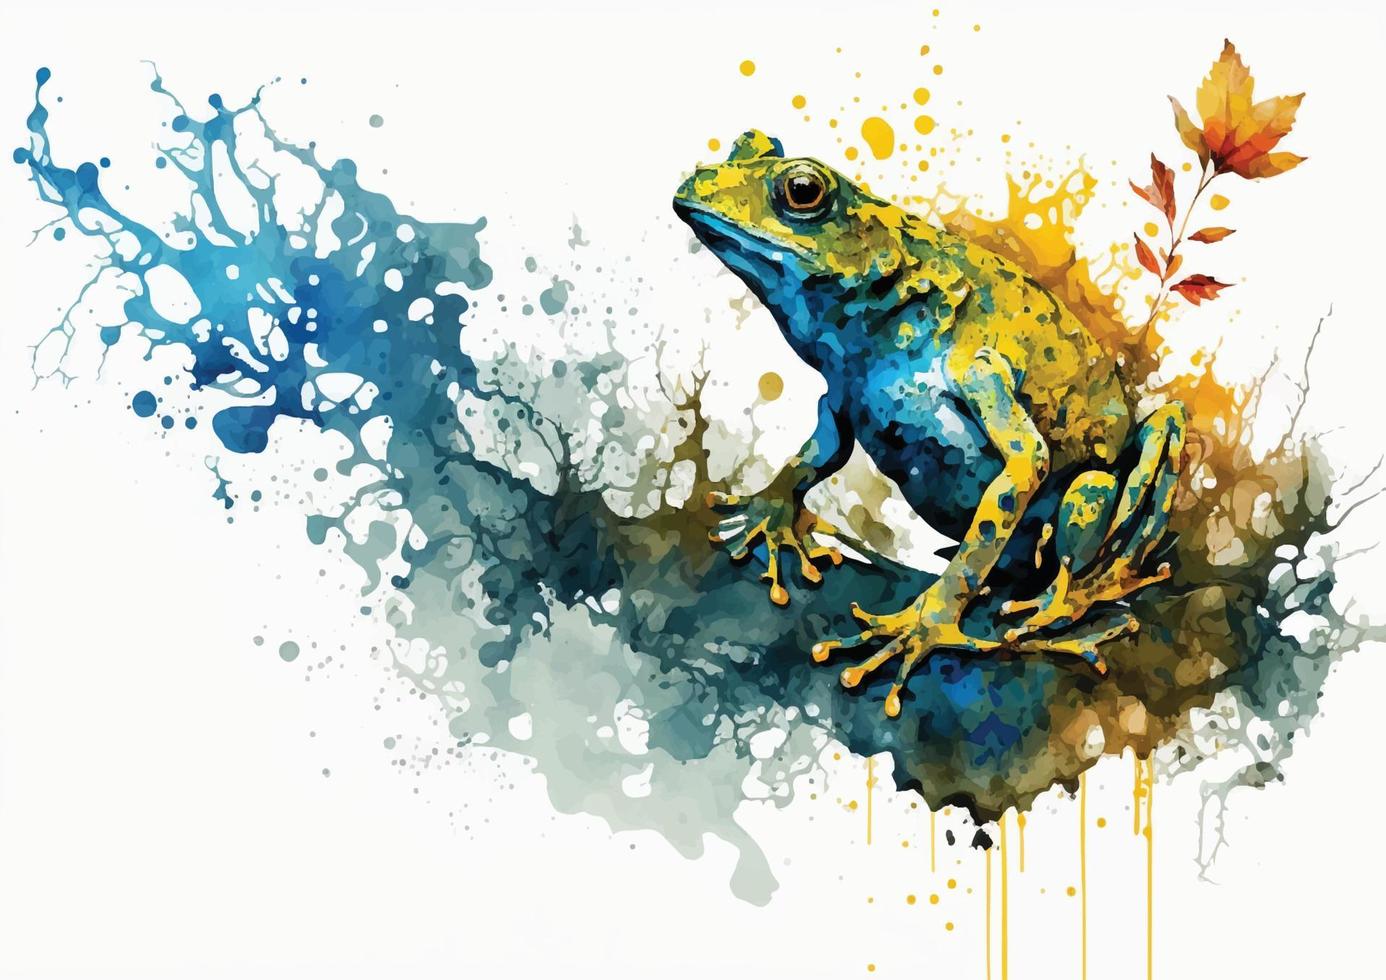 From cute and whimsical to bold and vibrant, these watercolor vector designs of frogs are sure to please